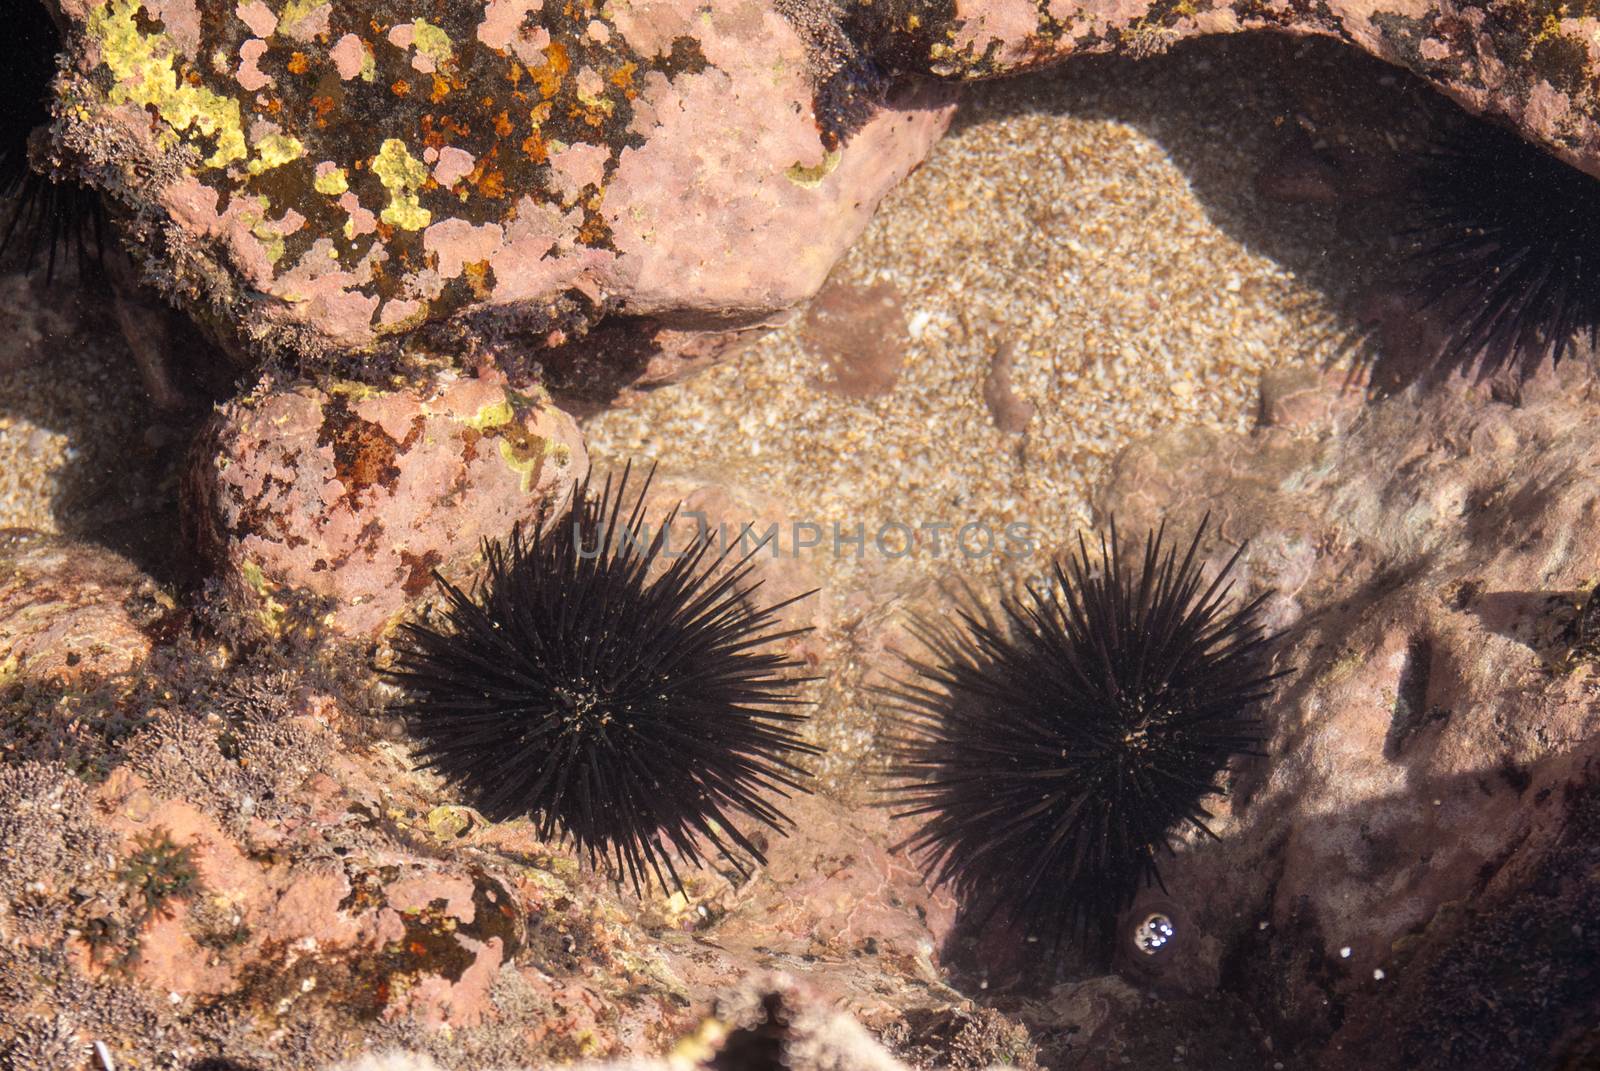 Sea Urchins cling to rock in tide pool by emattil